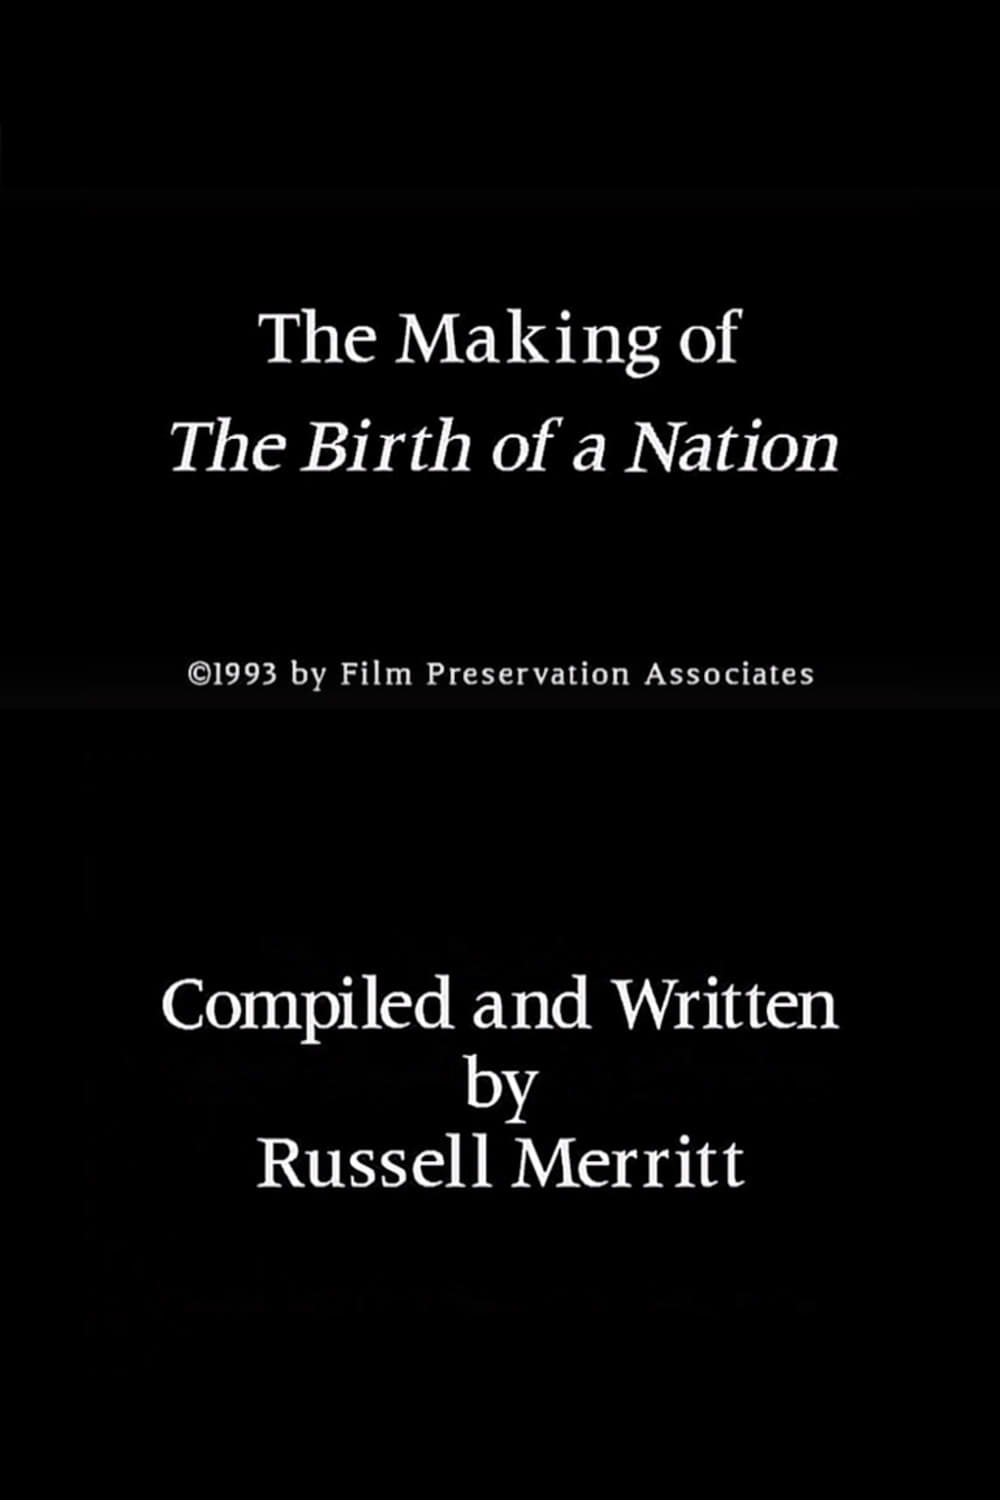 The Making of 'The Birth of a Nation'